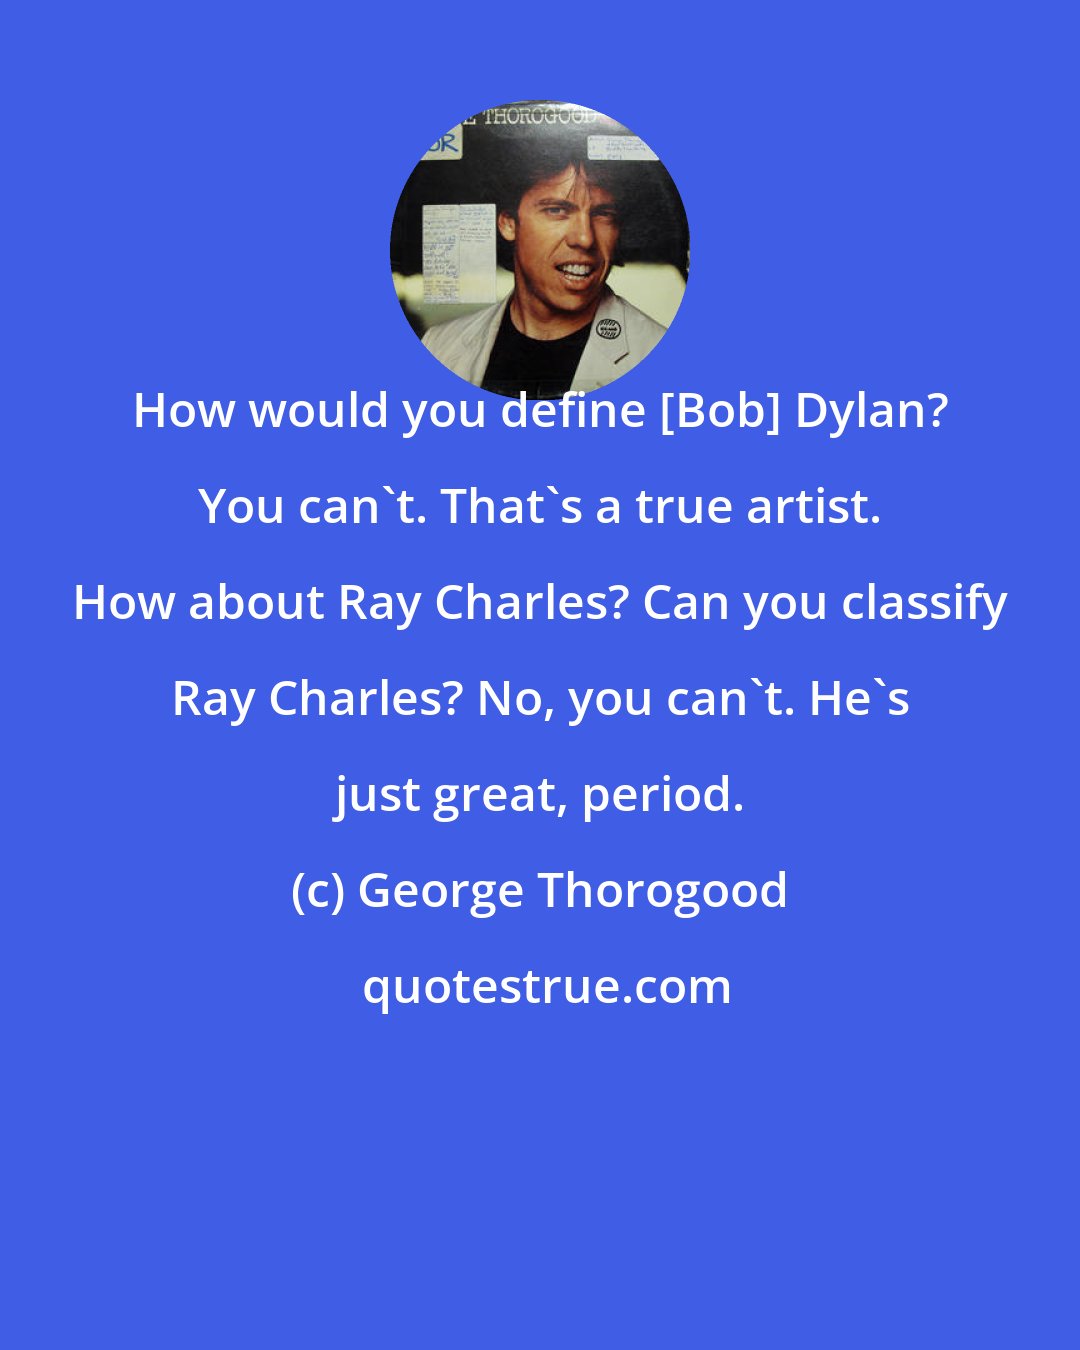 George Thorogood: How would you define [Bob] Dylan? You can't. That's a true artist. How about Ray Charles? Can you classify Ray Charles? No, you can't. He's just great, period.